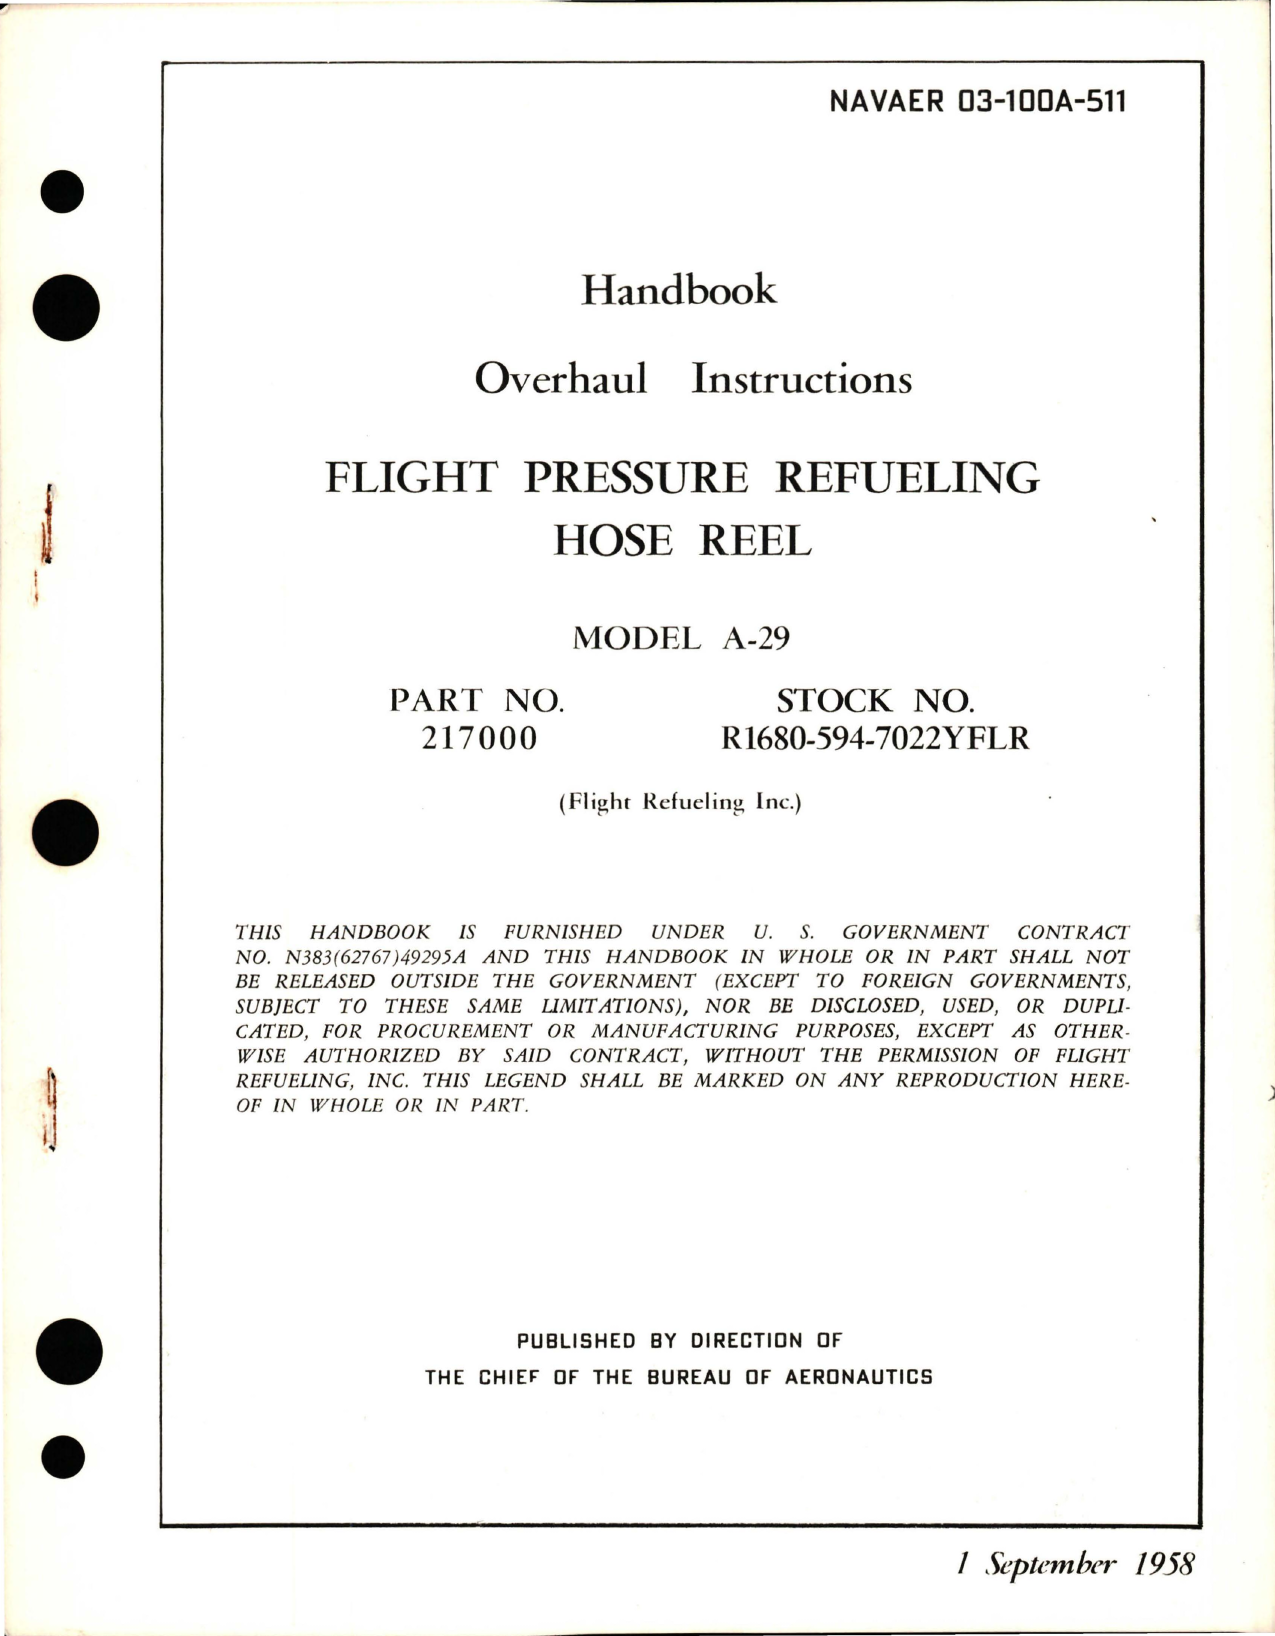 Sample page 1 from AirCorps Library document: Overhaul Instructions for Flight Pressure Refueling Hose Reel - Model A-29, Part 217000 